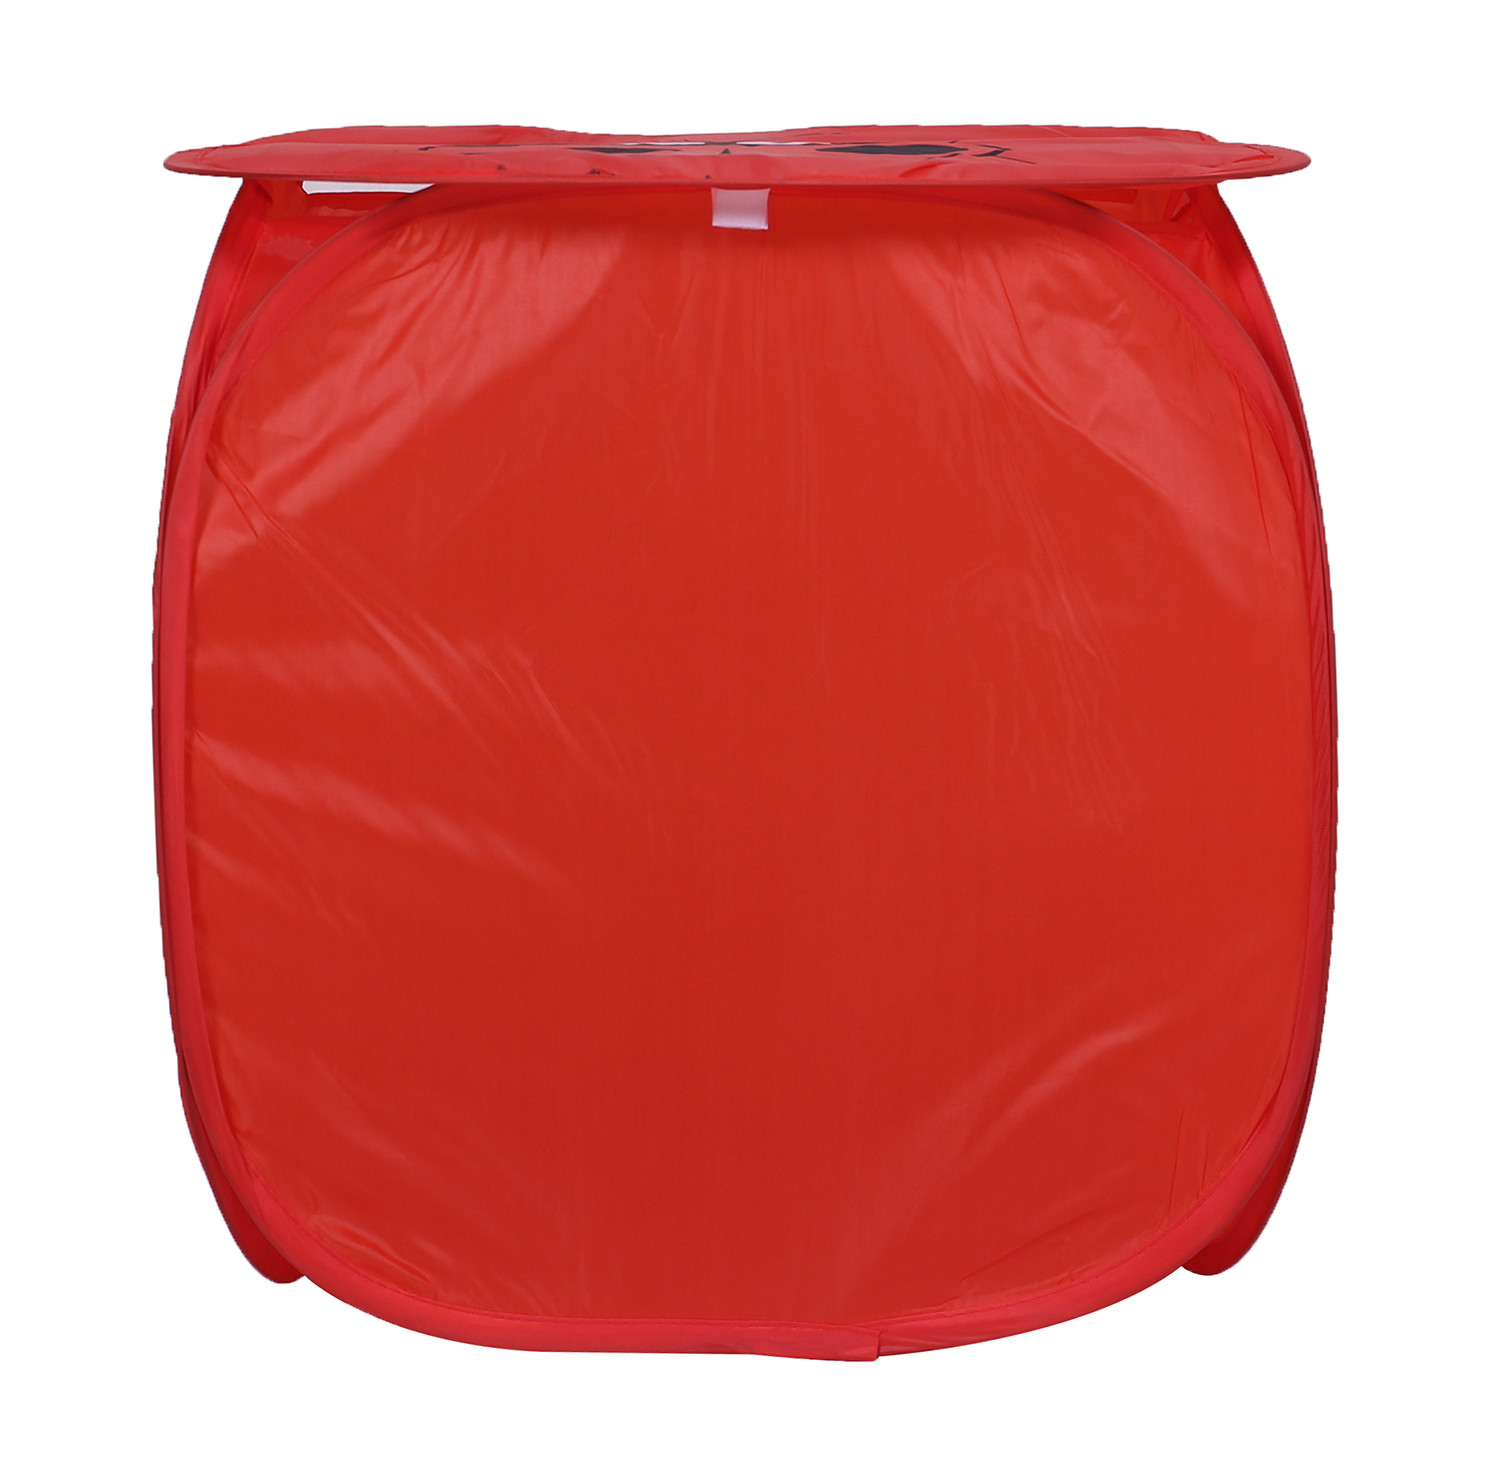 Kuber Industries Polyester Durable & Collapsible Square Laundry Basket|Clothes Storage Box With Lid & Side Handles,45 Ltr.(Red)